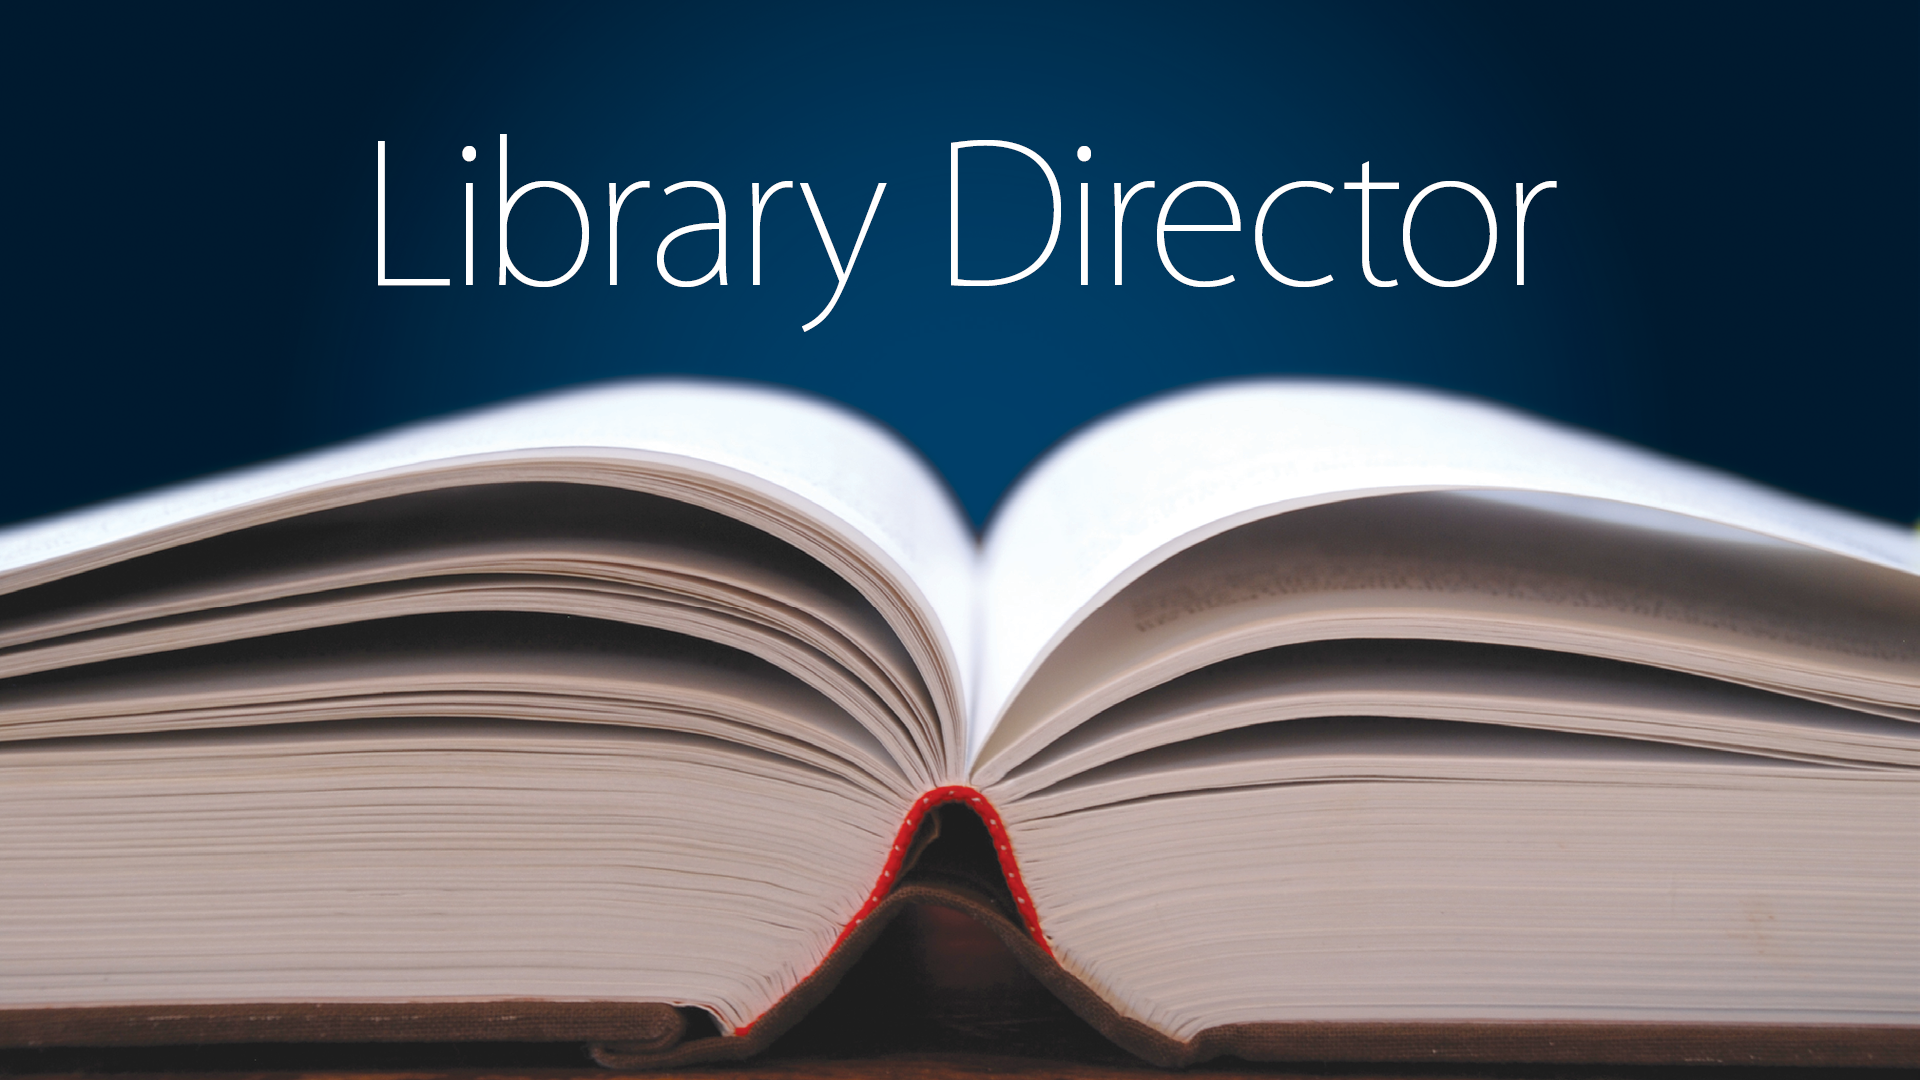 image of an open book with the words "Library Director" above it